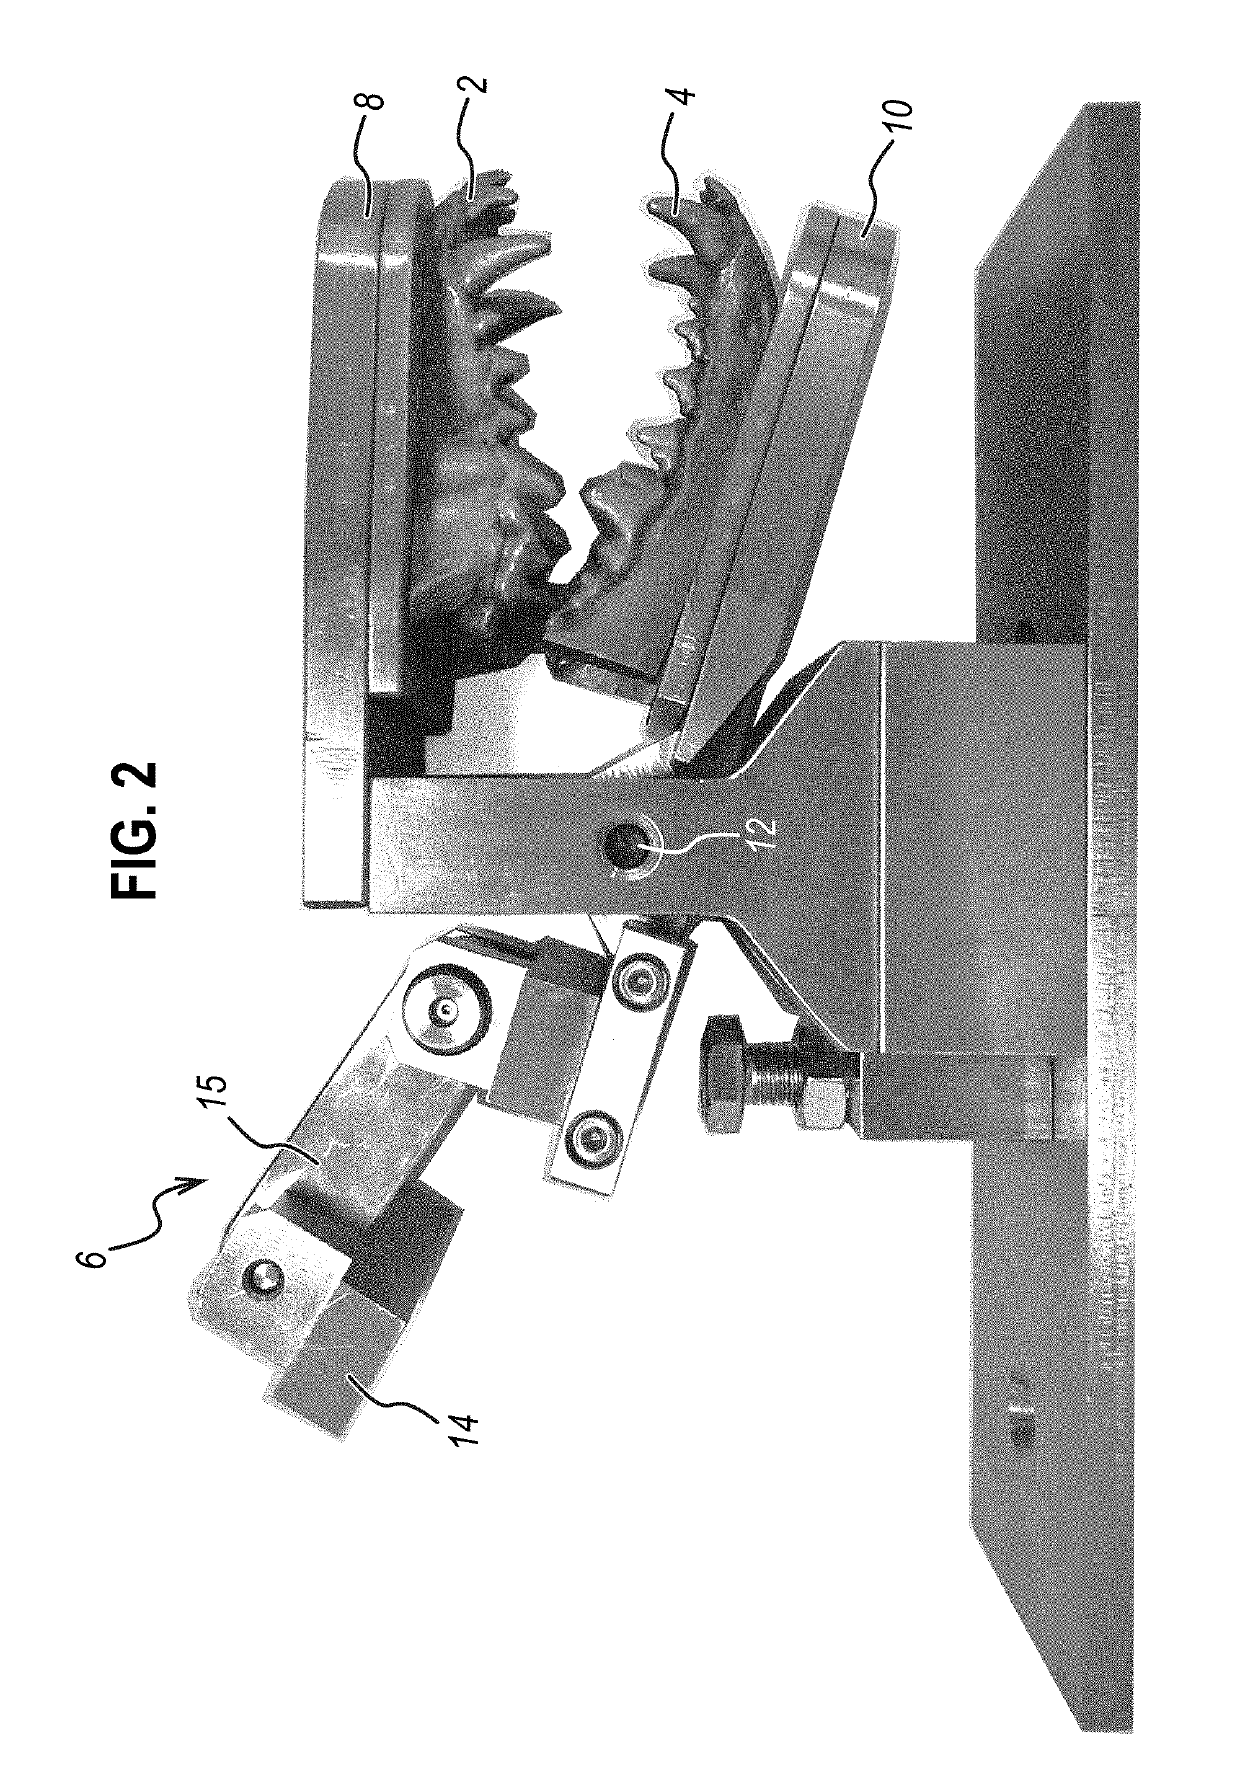 Animal dentistry apparatus and methods